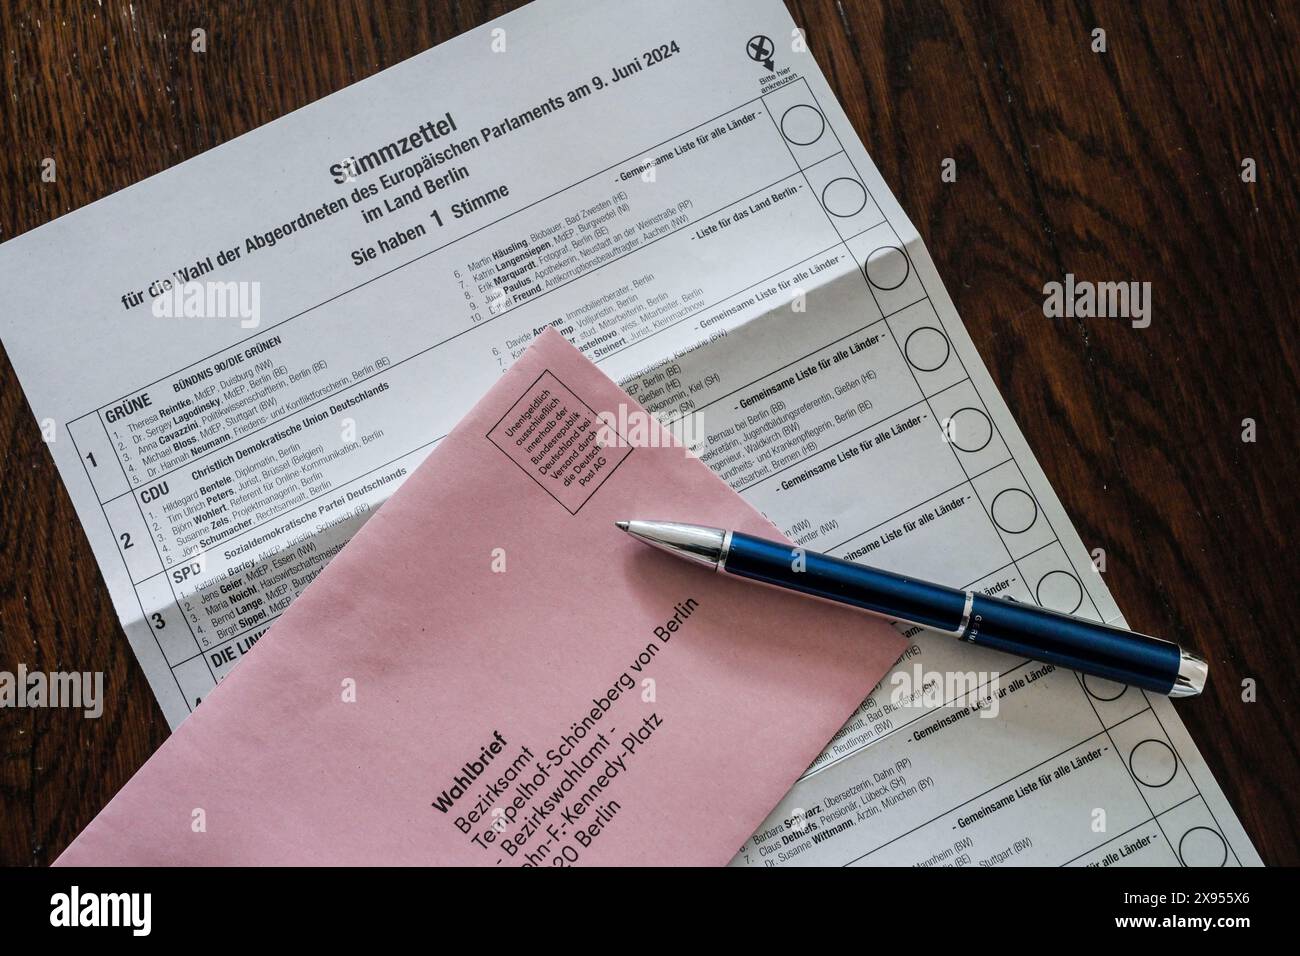 Voting letter, ballot paper, ballot paper for the 2024 European elections in Germany, Wahlbrief, Stimmzettel, Wahlzettel zur Europawahl 2024 in Deutsc Stock Photo